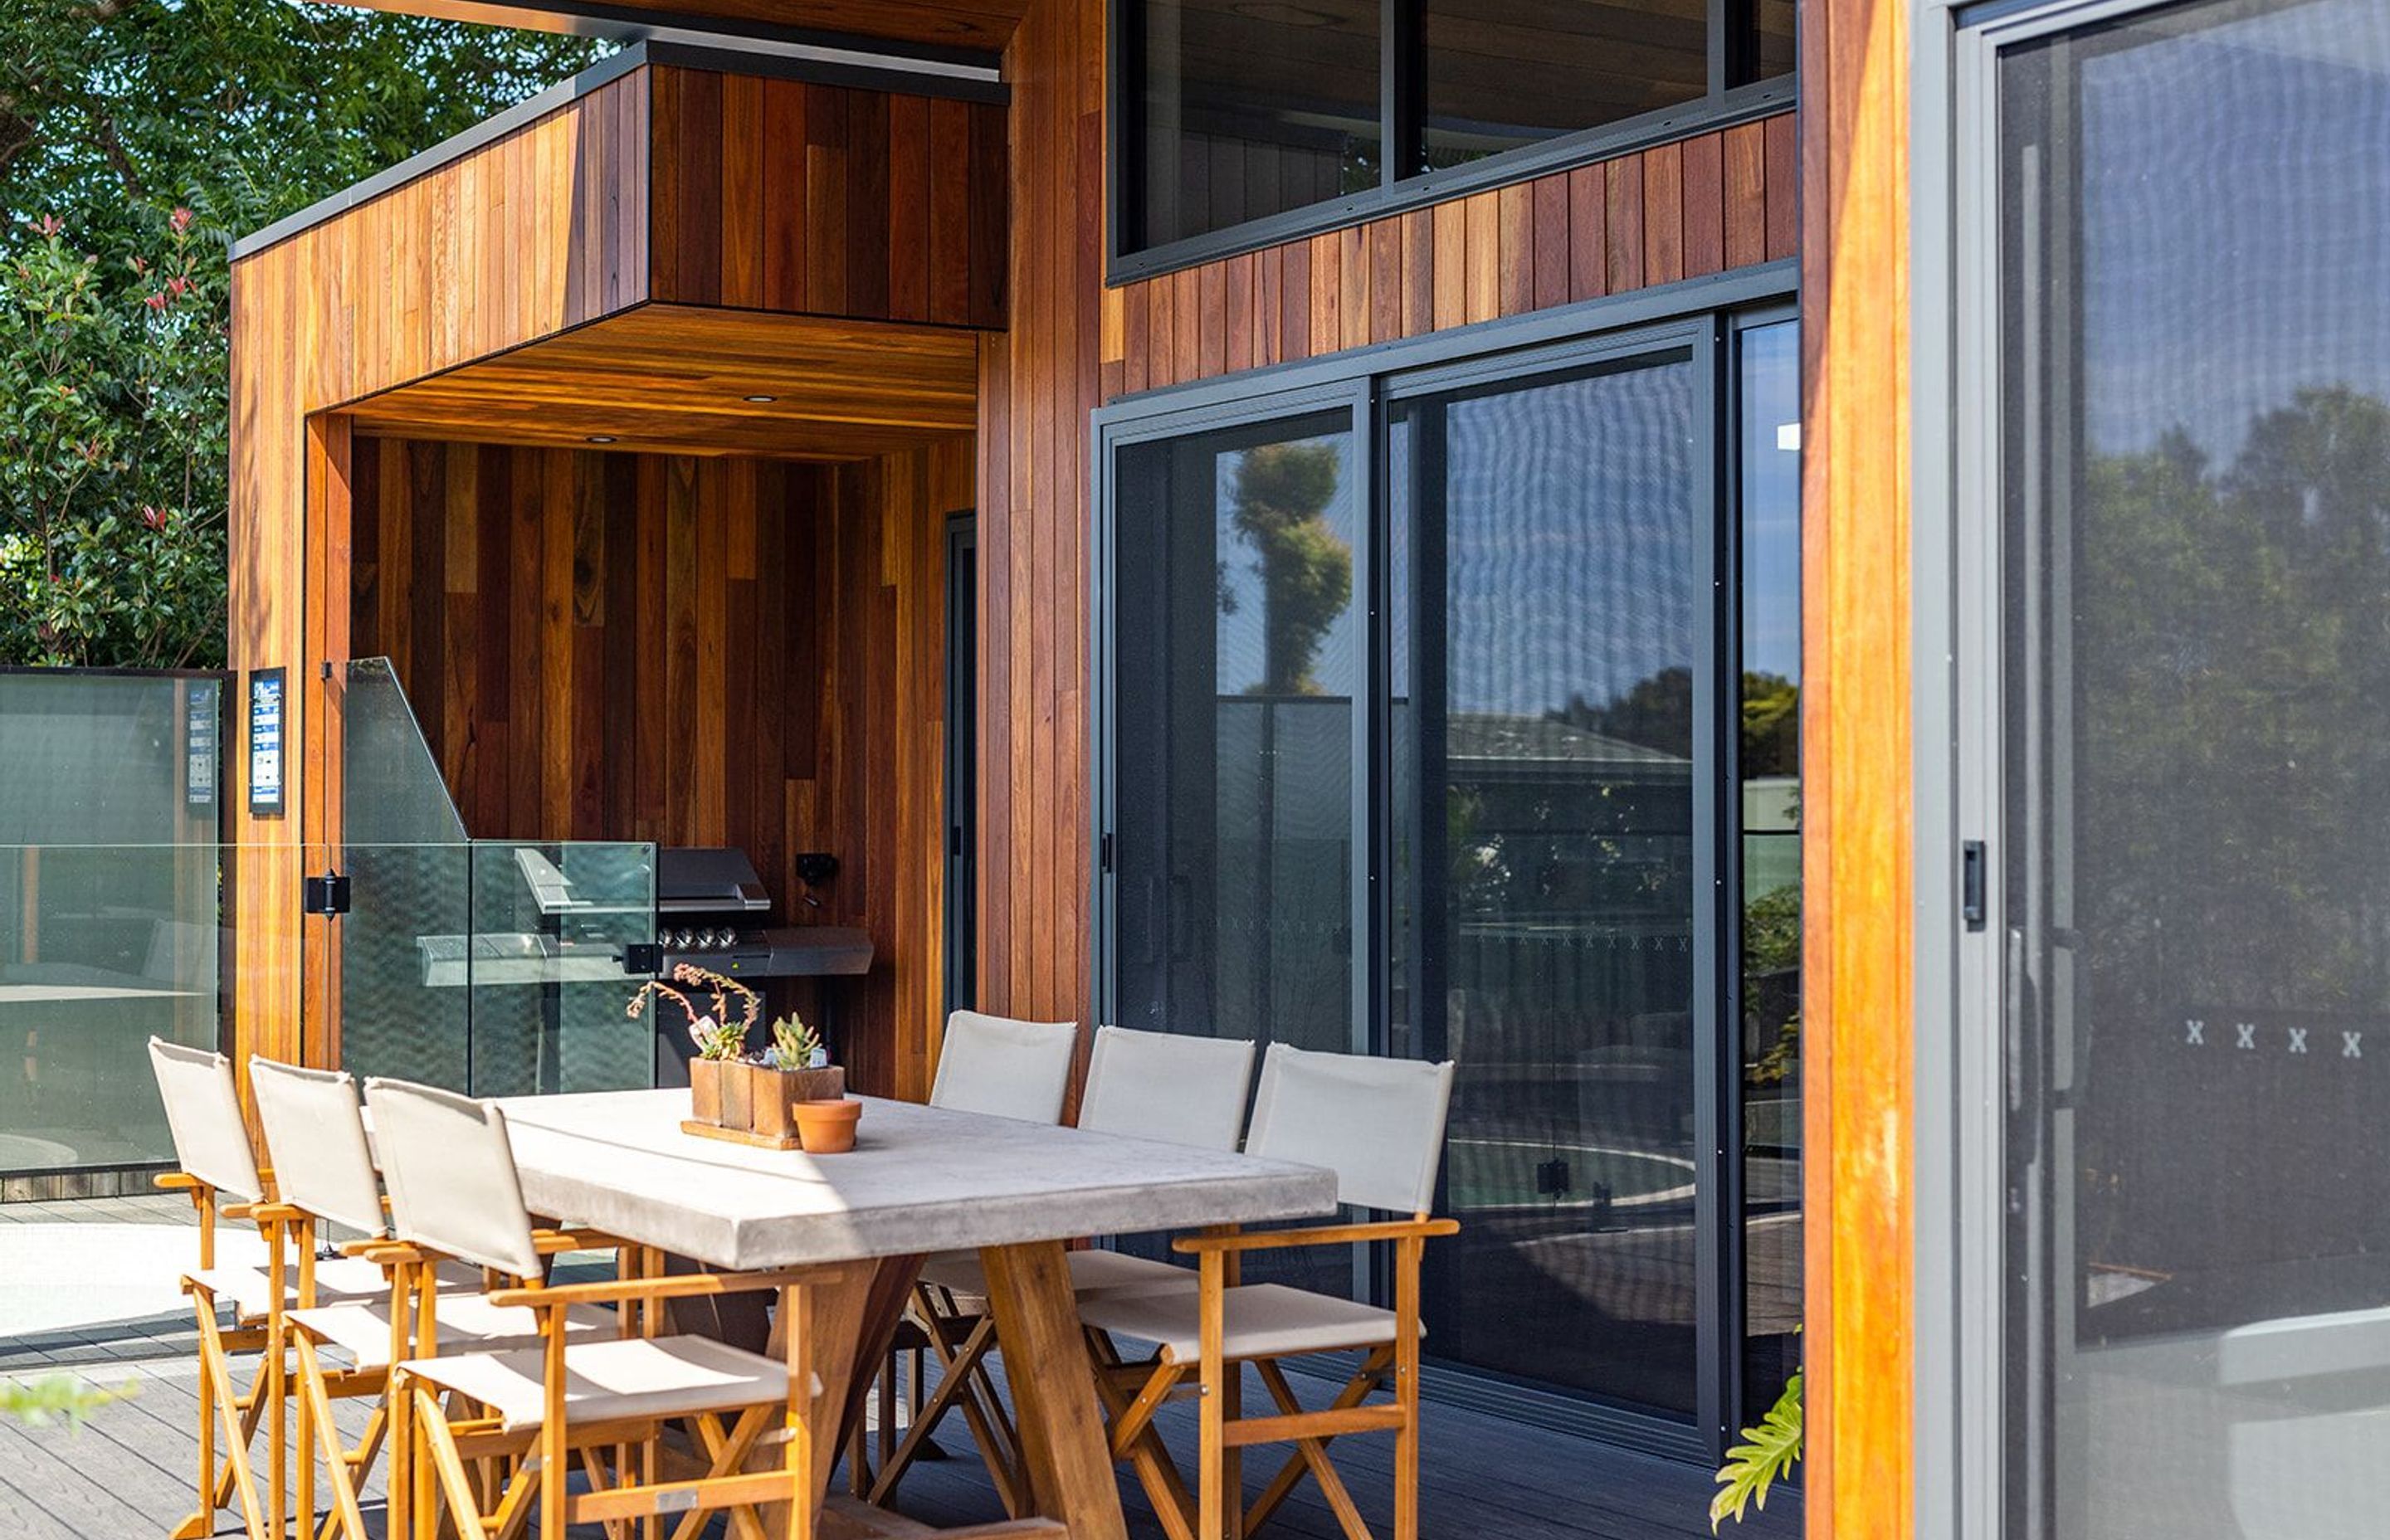 The system comes in solid, durable Australian hardwood.